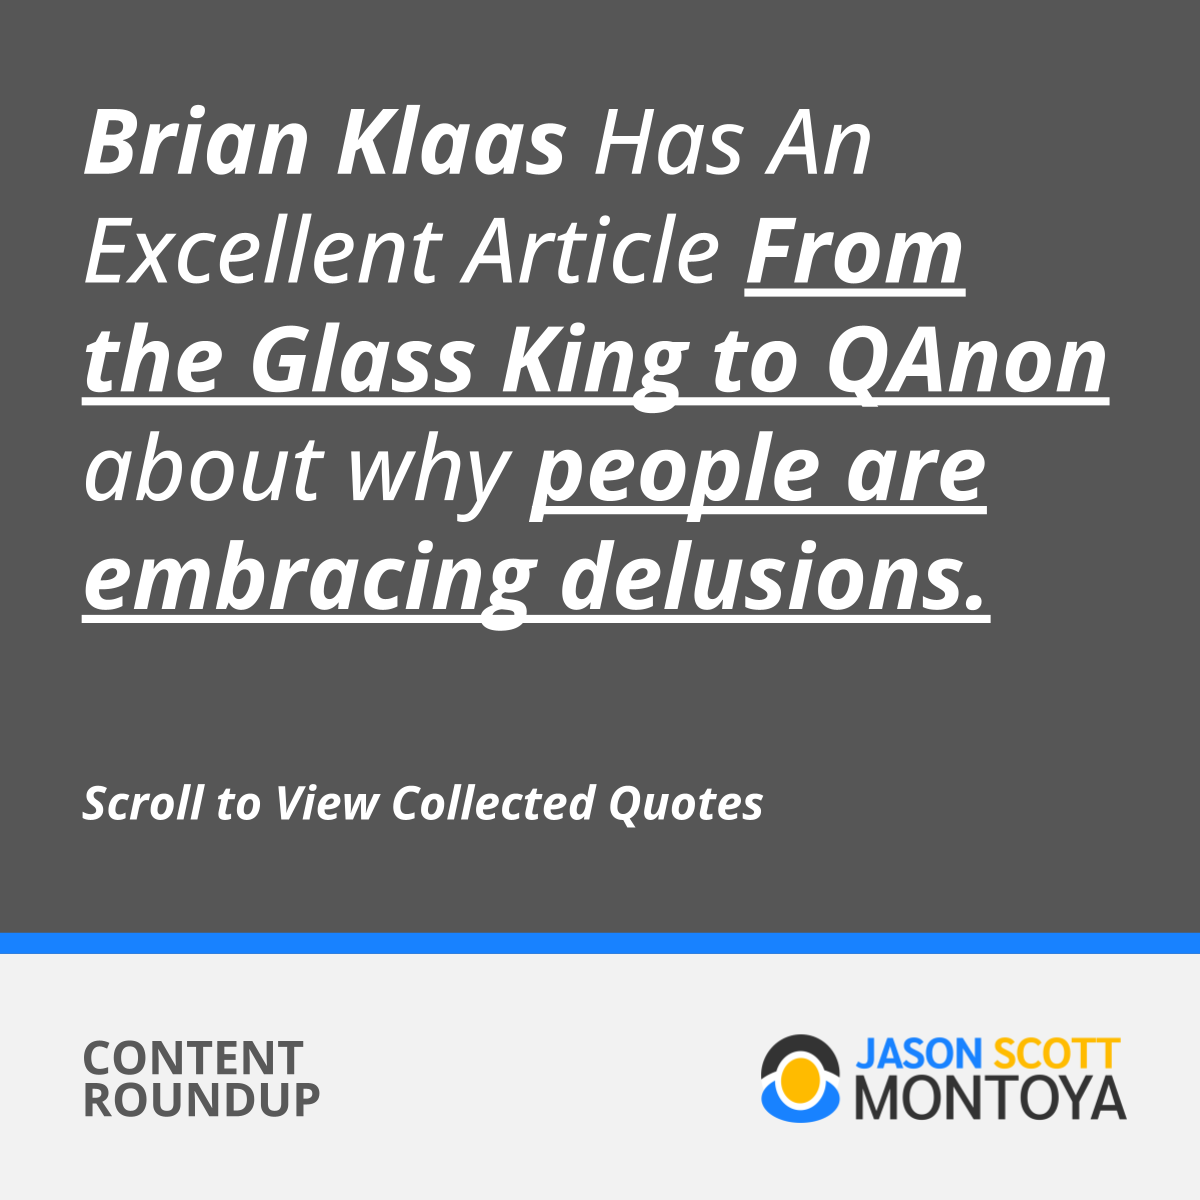 Brian Klaas Has An Excellent Article From the Glass King to QAnon about why people are embracing delusions.   Scroll to View Collected Quotes